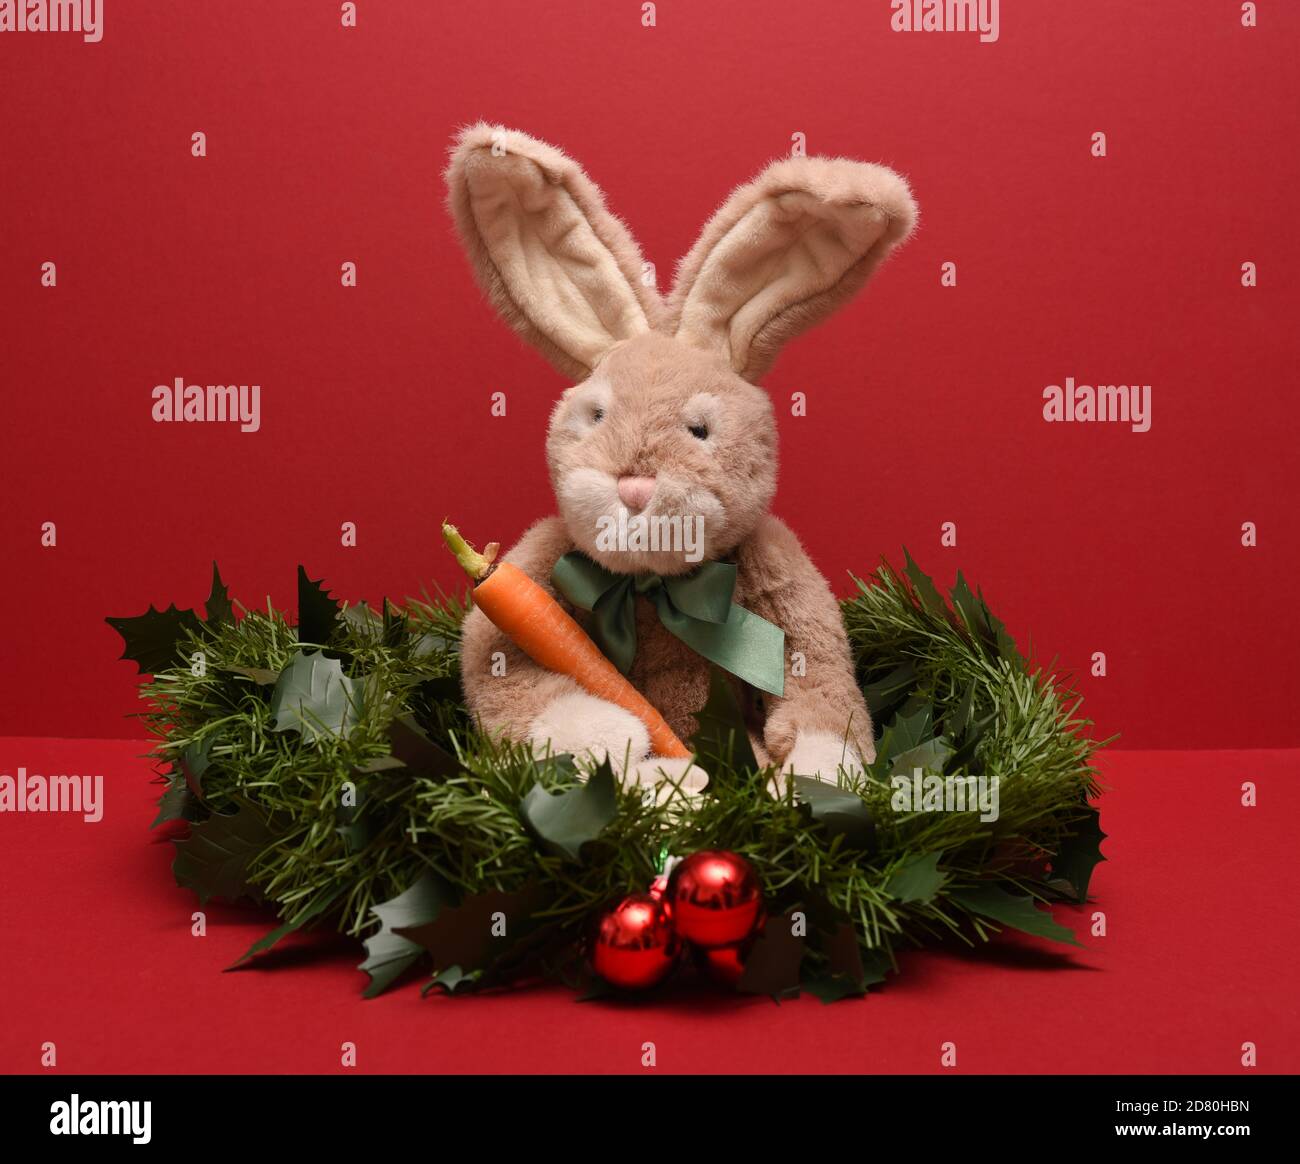 Christmas Toy Bunny with a carrot Stock Photo